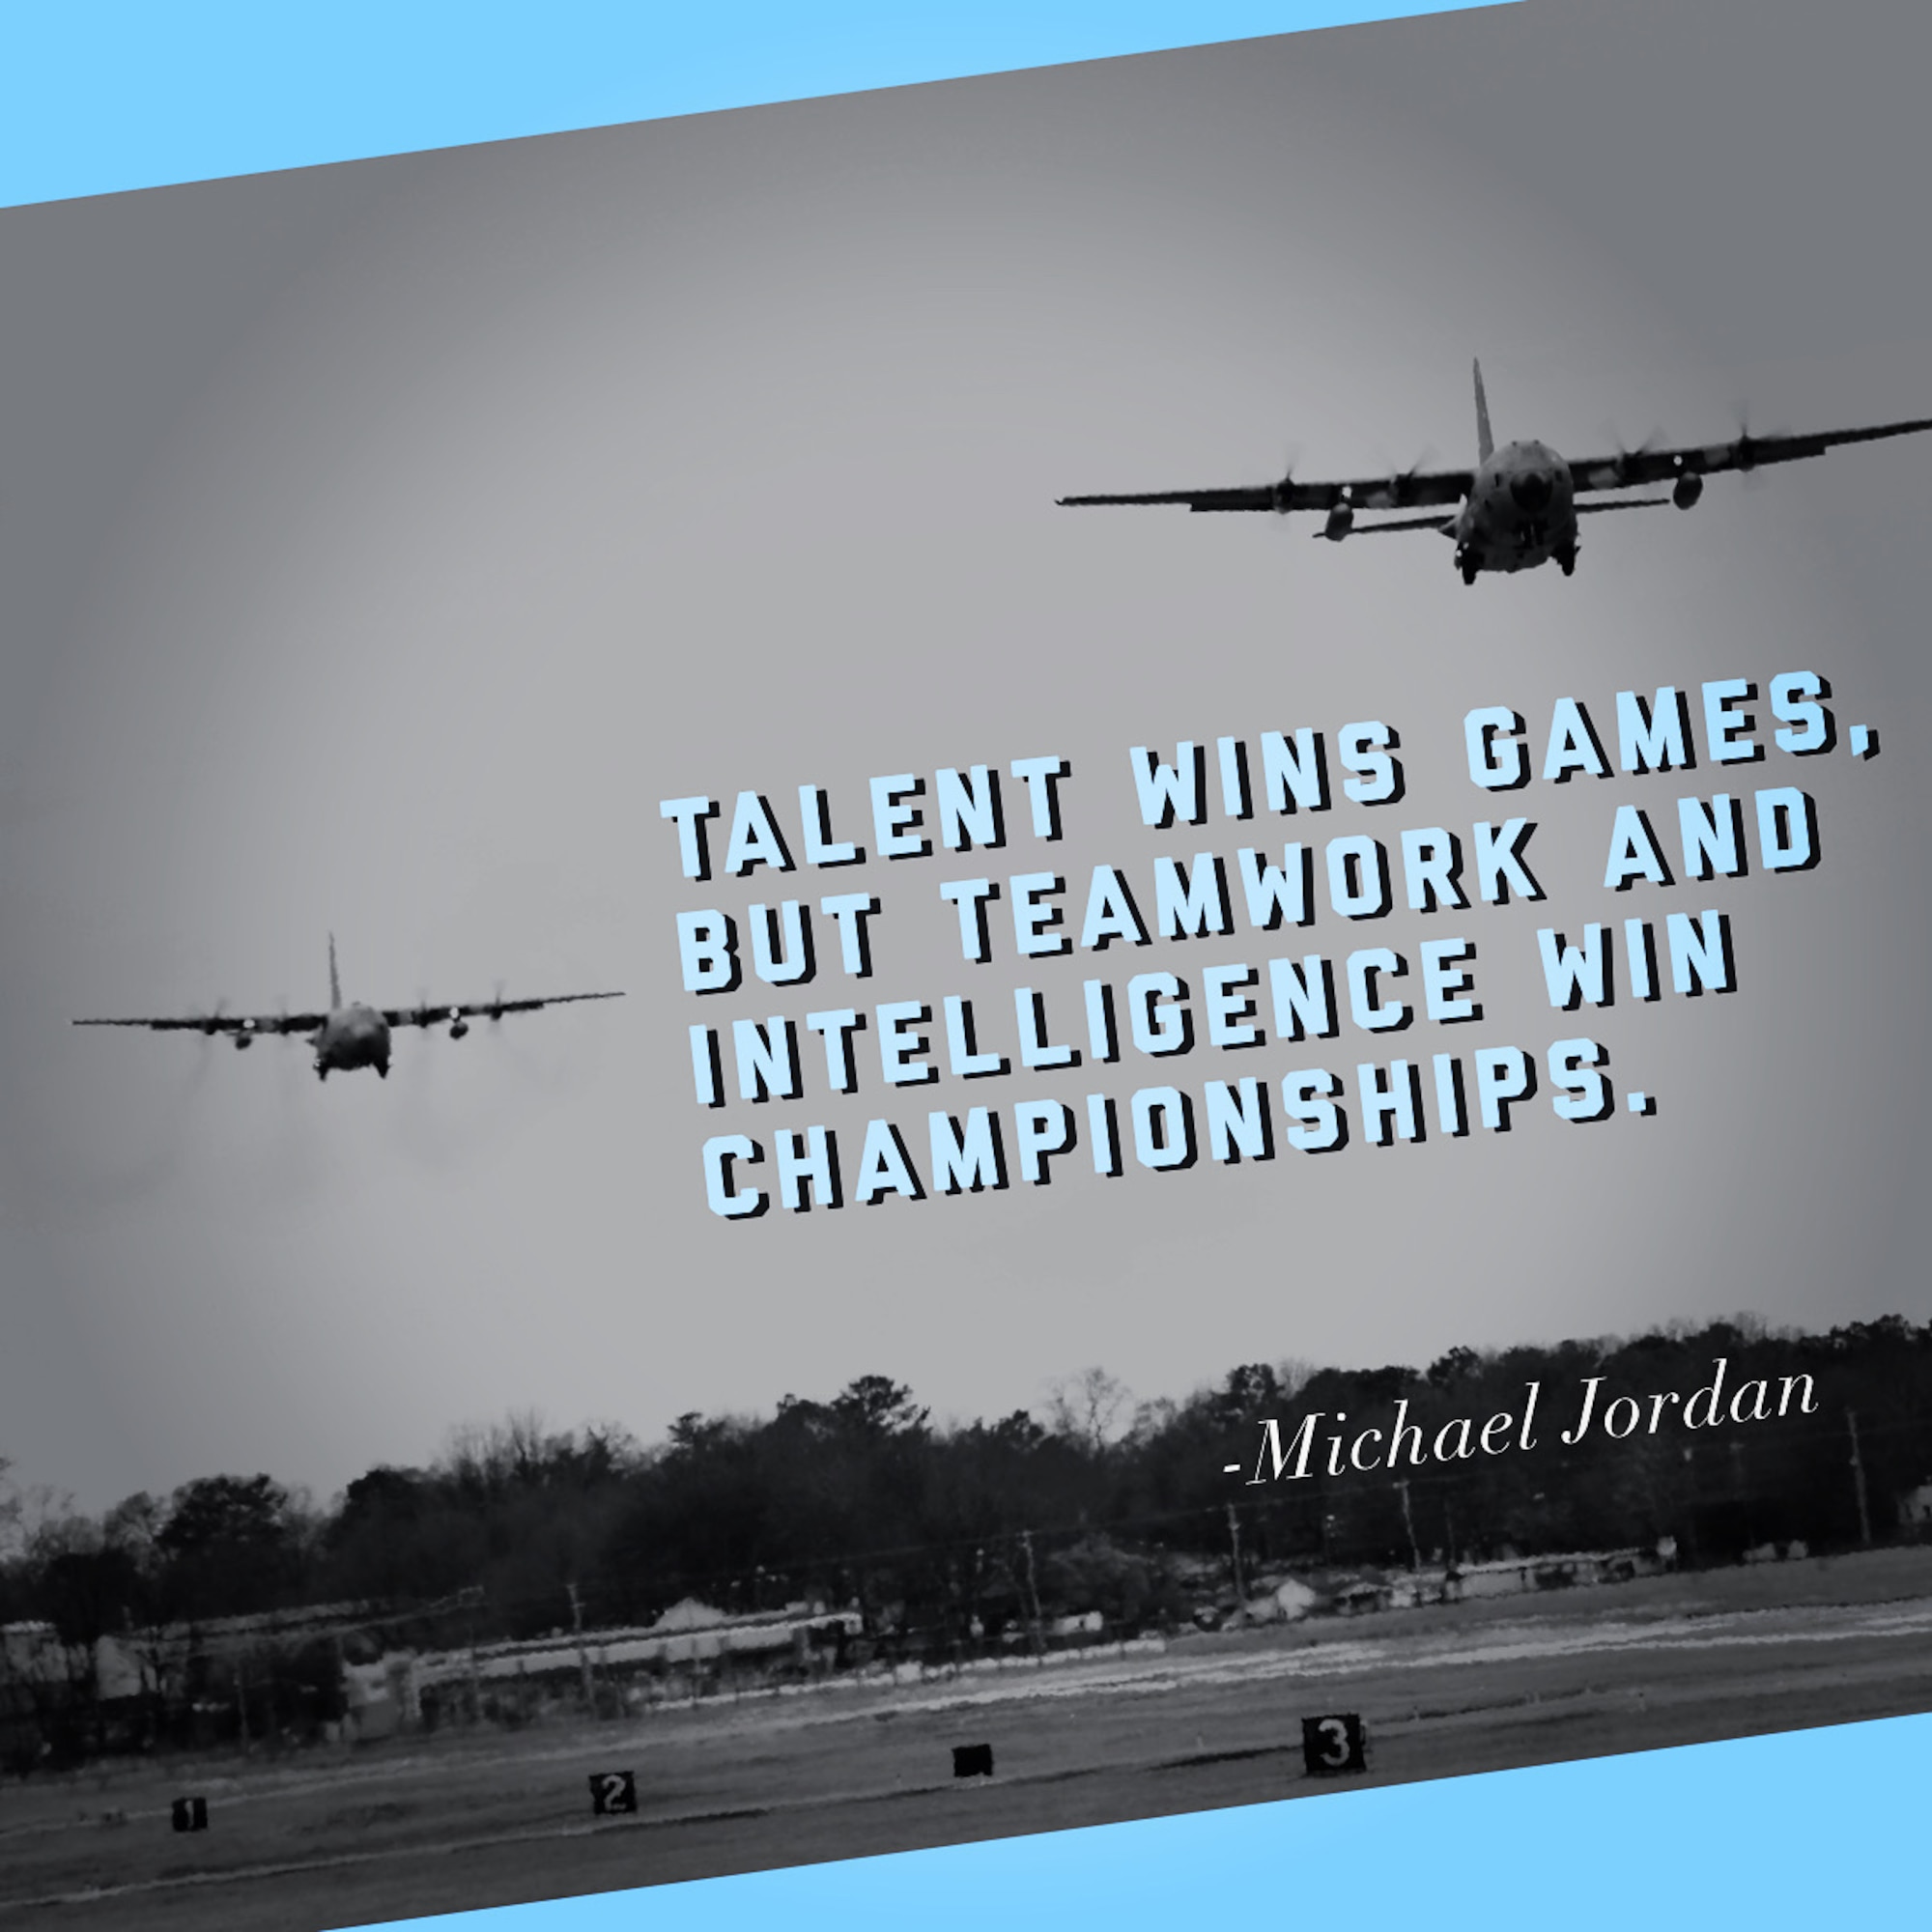 This week's motivation comes from Michael Jordan, a former professional basketball player who played 15 seasons in the NBA and won six championships.